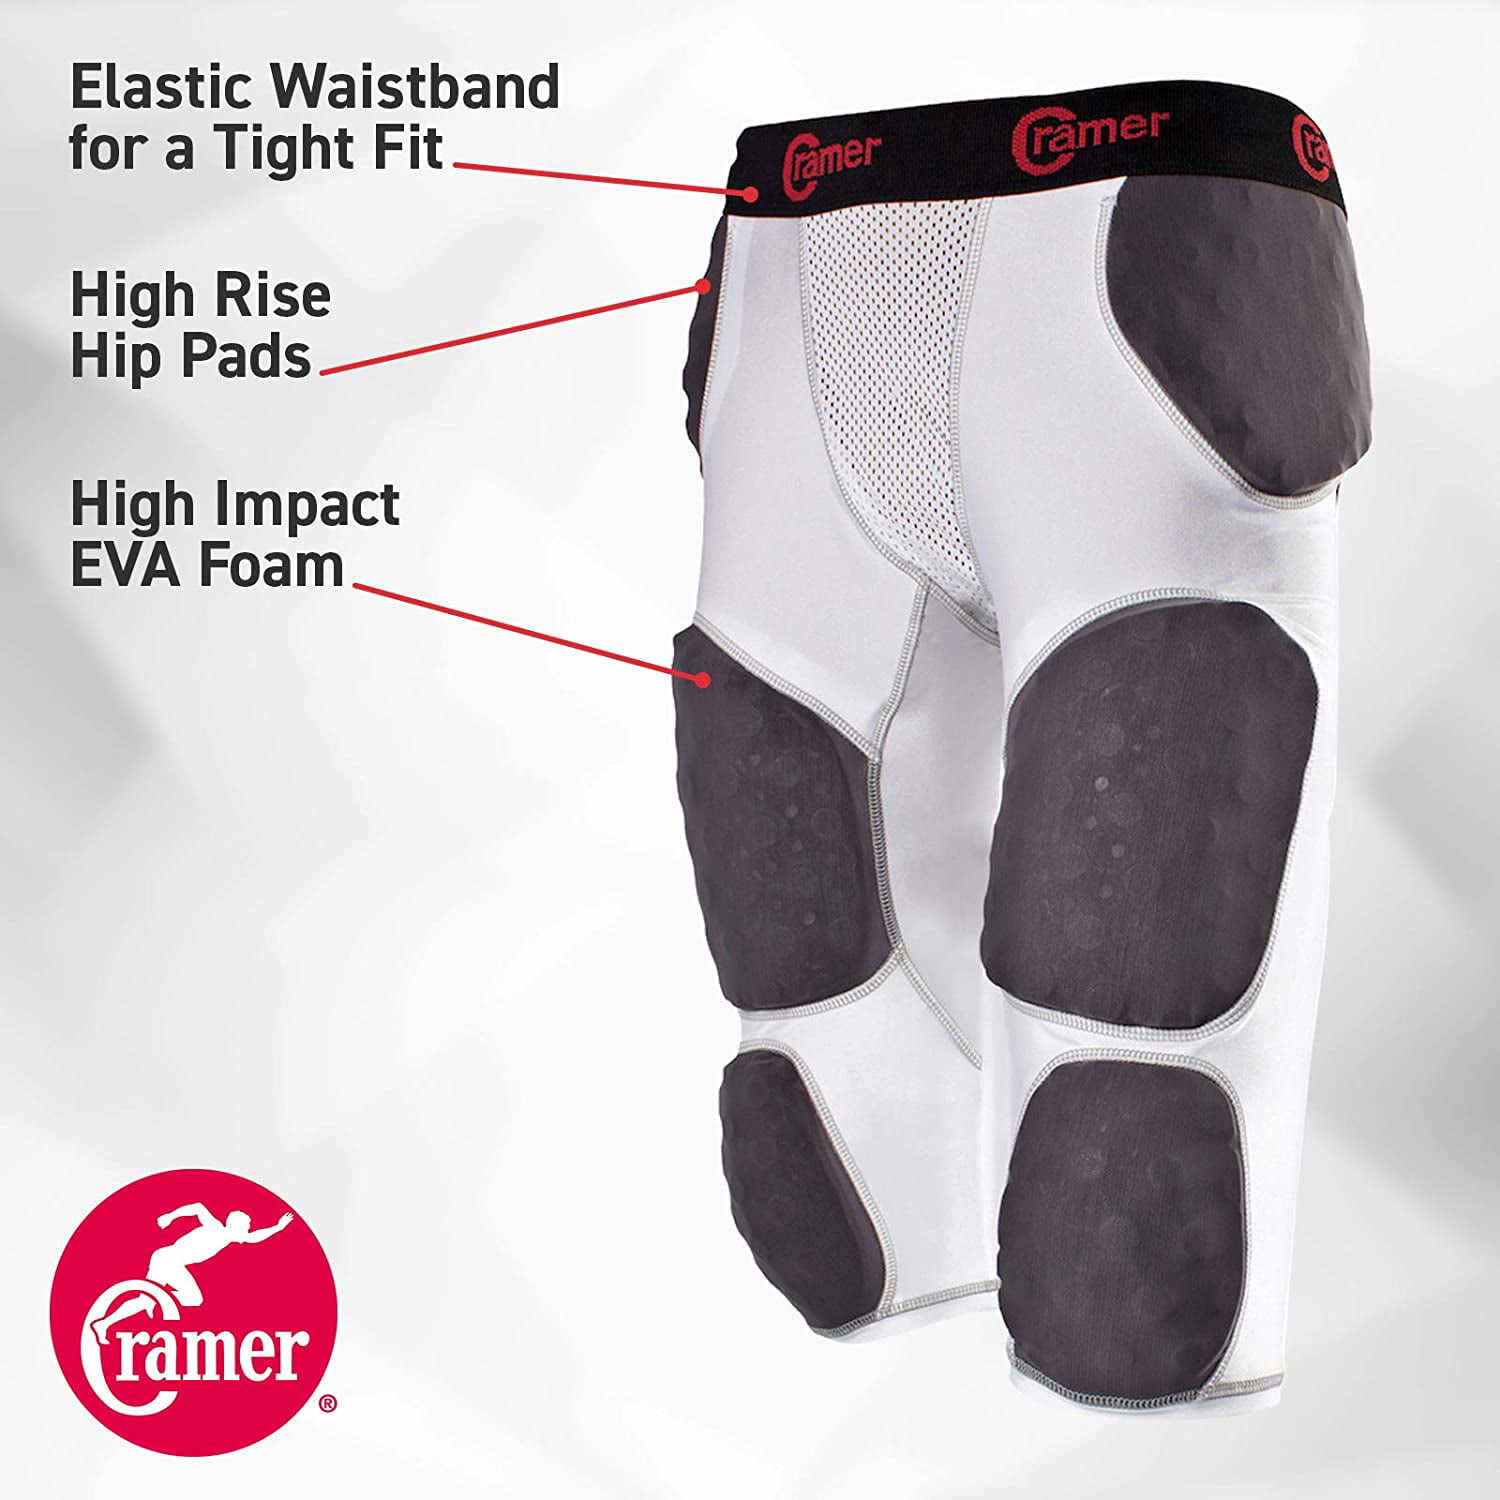 Hip and Tailbone Pads Football Pant Gray Foam Padding for Extra Protection Football Protection Gear Breathable Fabric Football Gear Cramer Hurricane 5 Pad Football Girdle Medium with Thigh